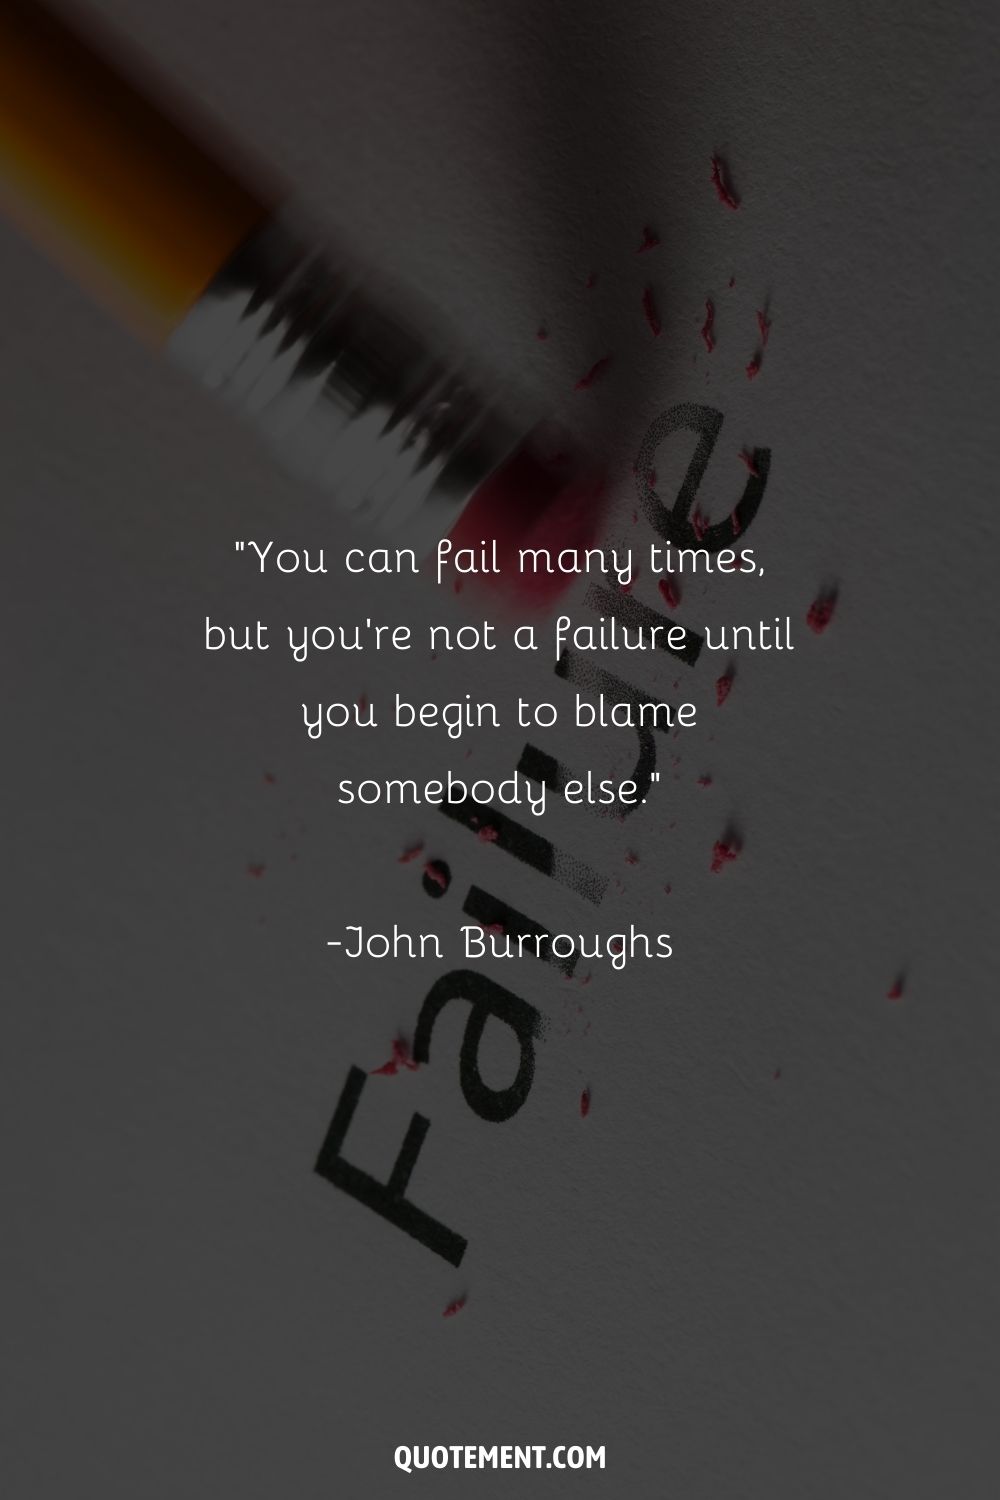 “You can fail many times, but you're not a failure until you begin to blame somebody else.” ― John Burroughs